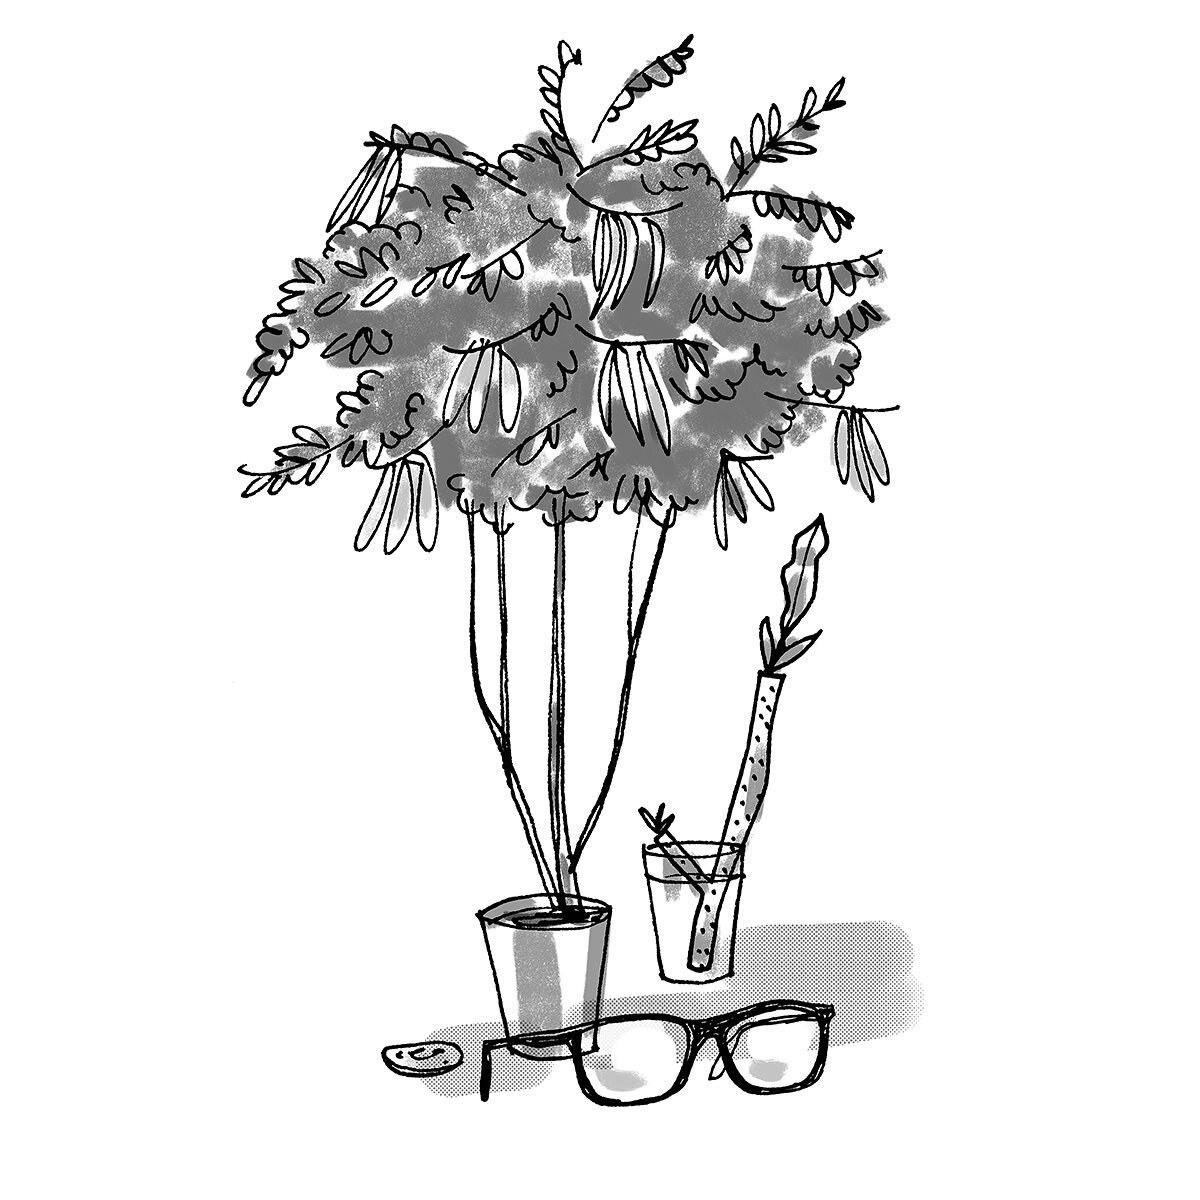 An image from an upcoming book that I illustrated, Leaf Your Troubles behind by @karenhugg . Due out on July 15th!
.
.
.
#illustratedgarden #gardeningbook #planttherapy #blackandwhiteart